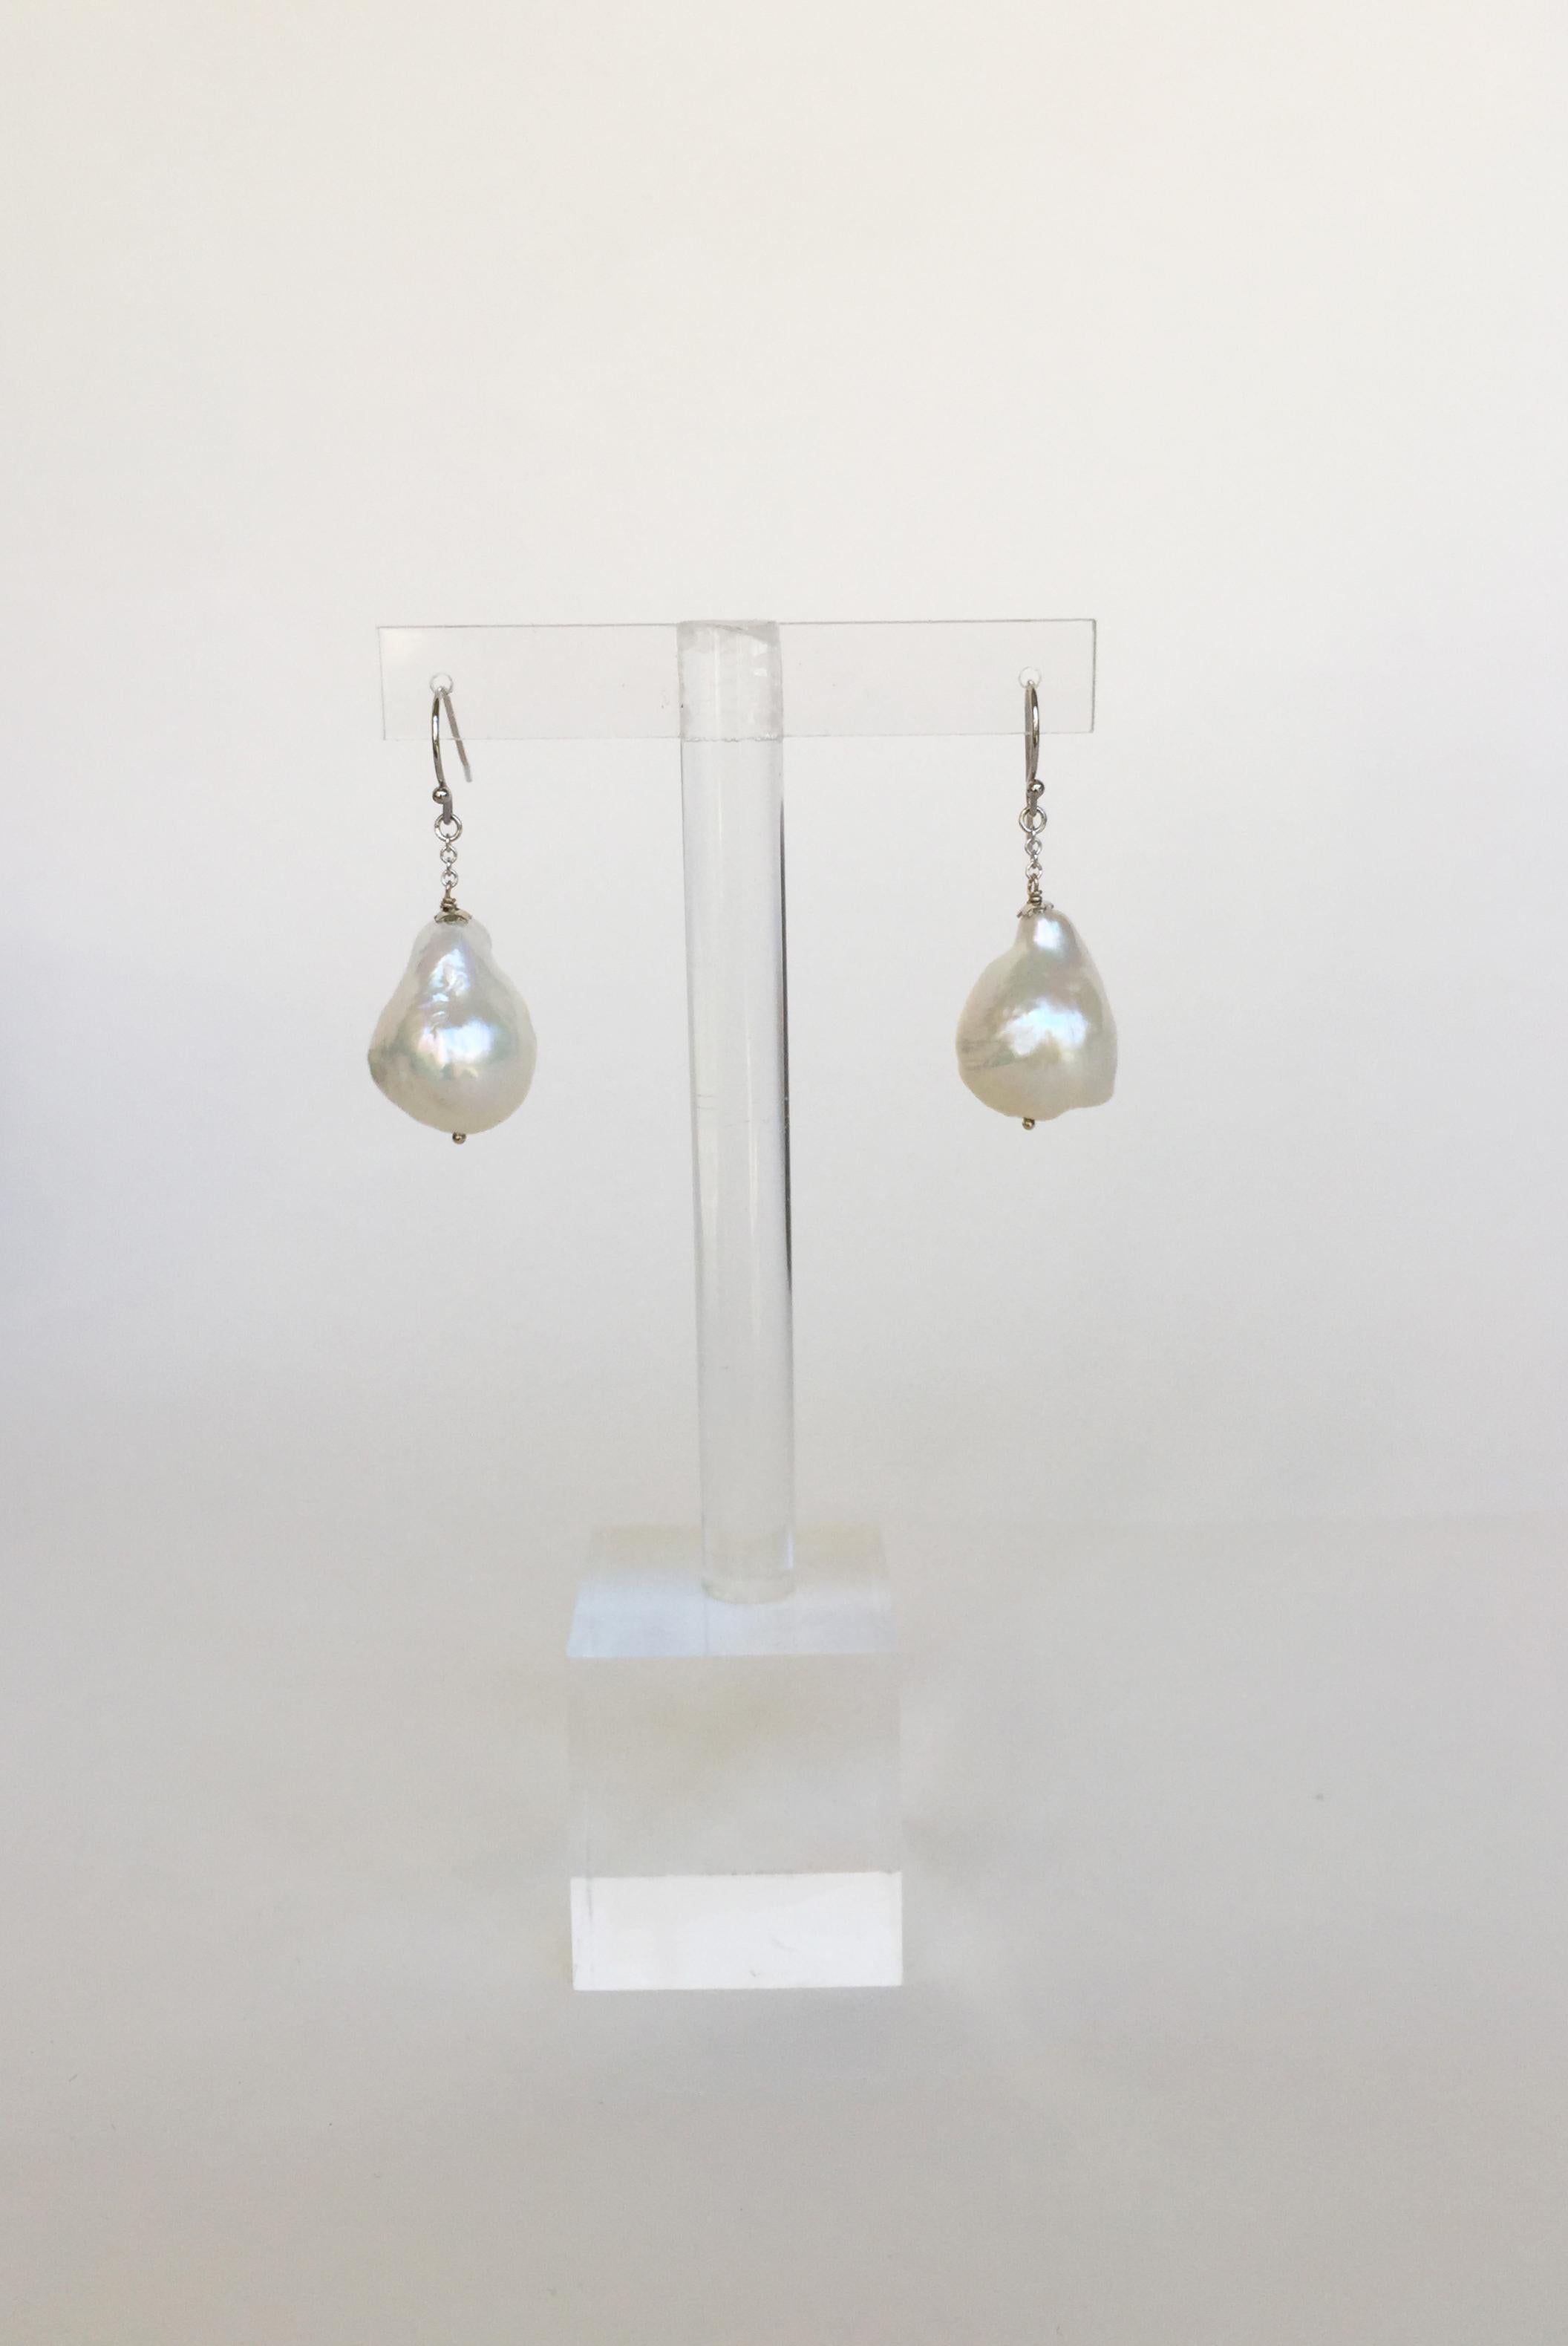 Women's Marina J Large White Baroque Pearl Dangle Earrings with 14 k Gold Chain and Hook